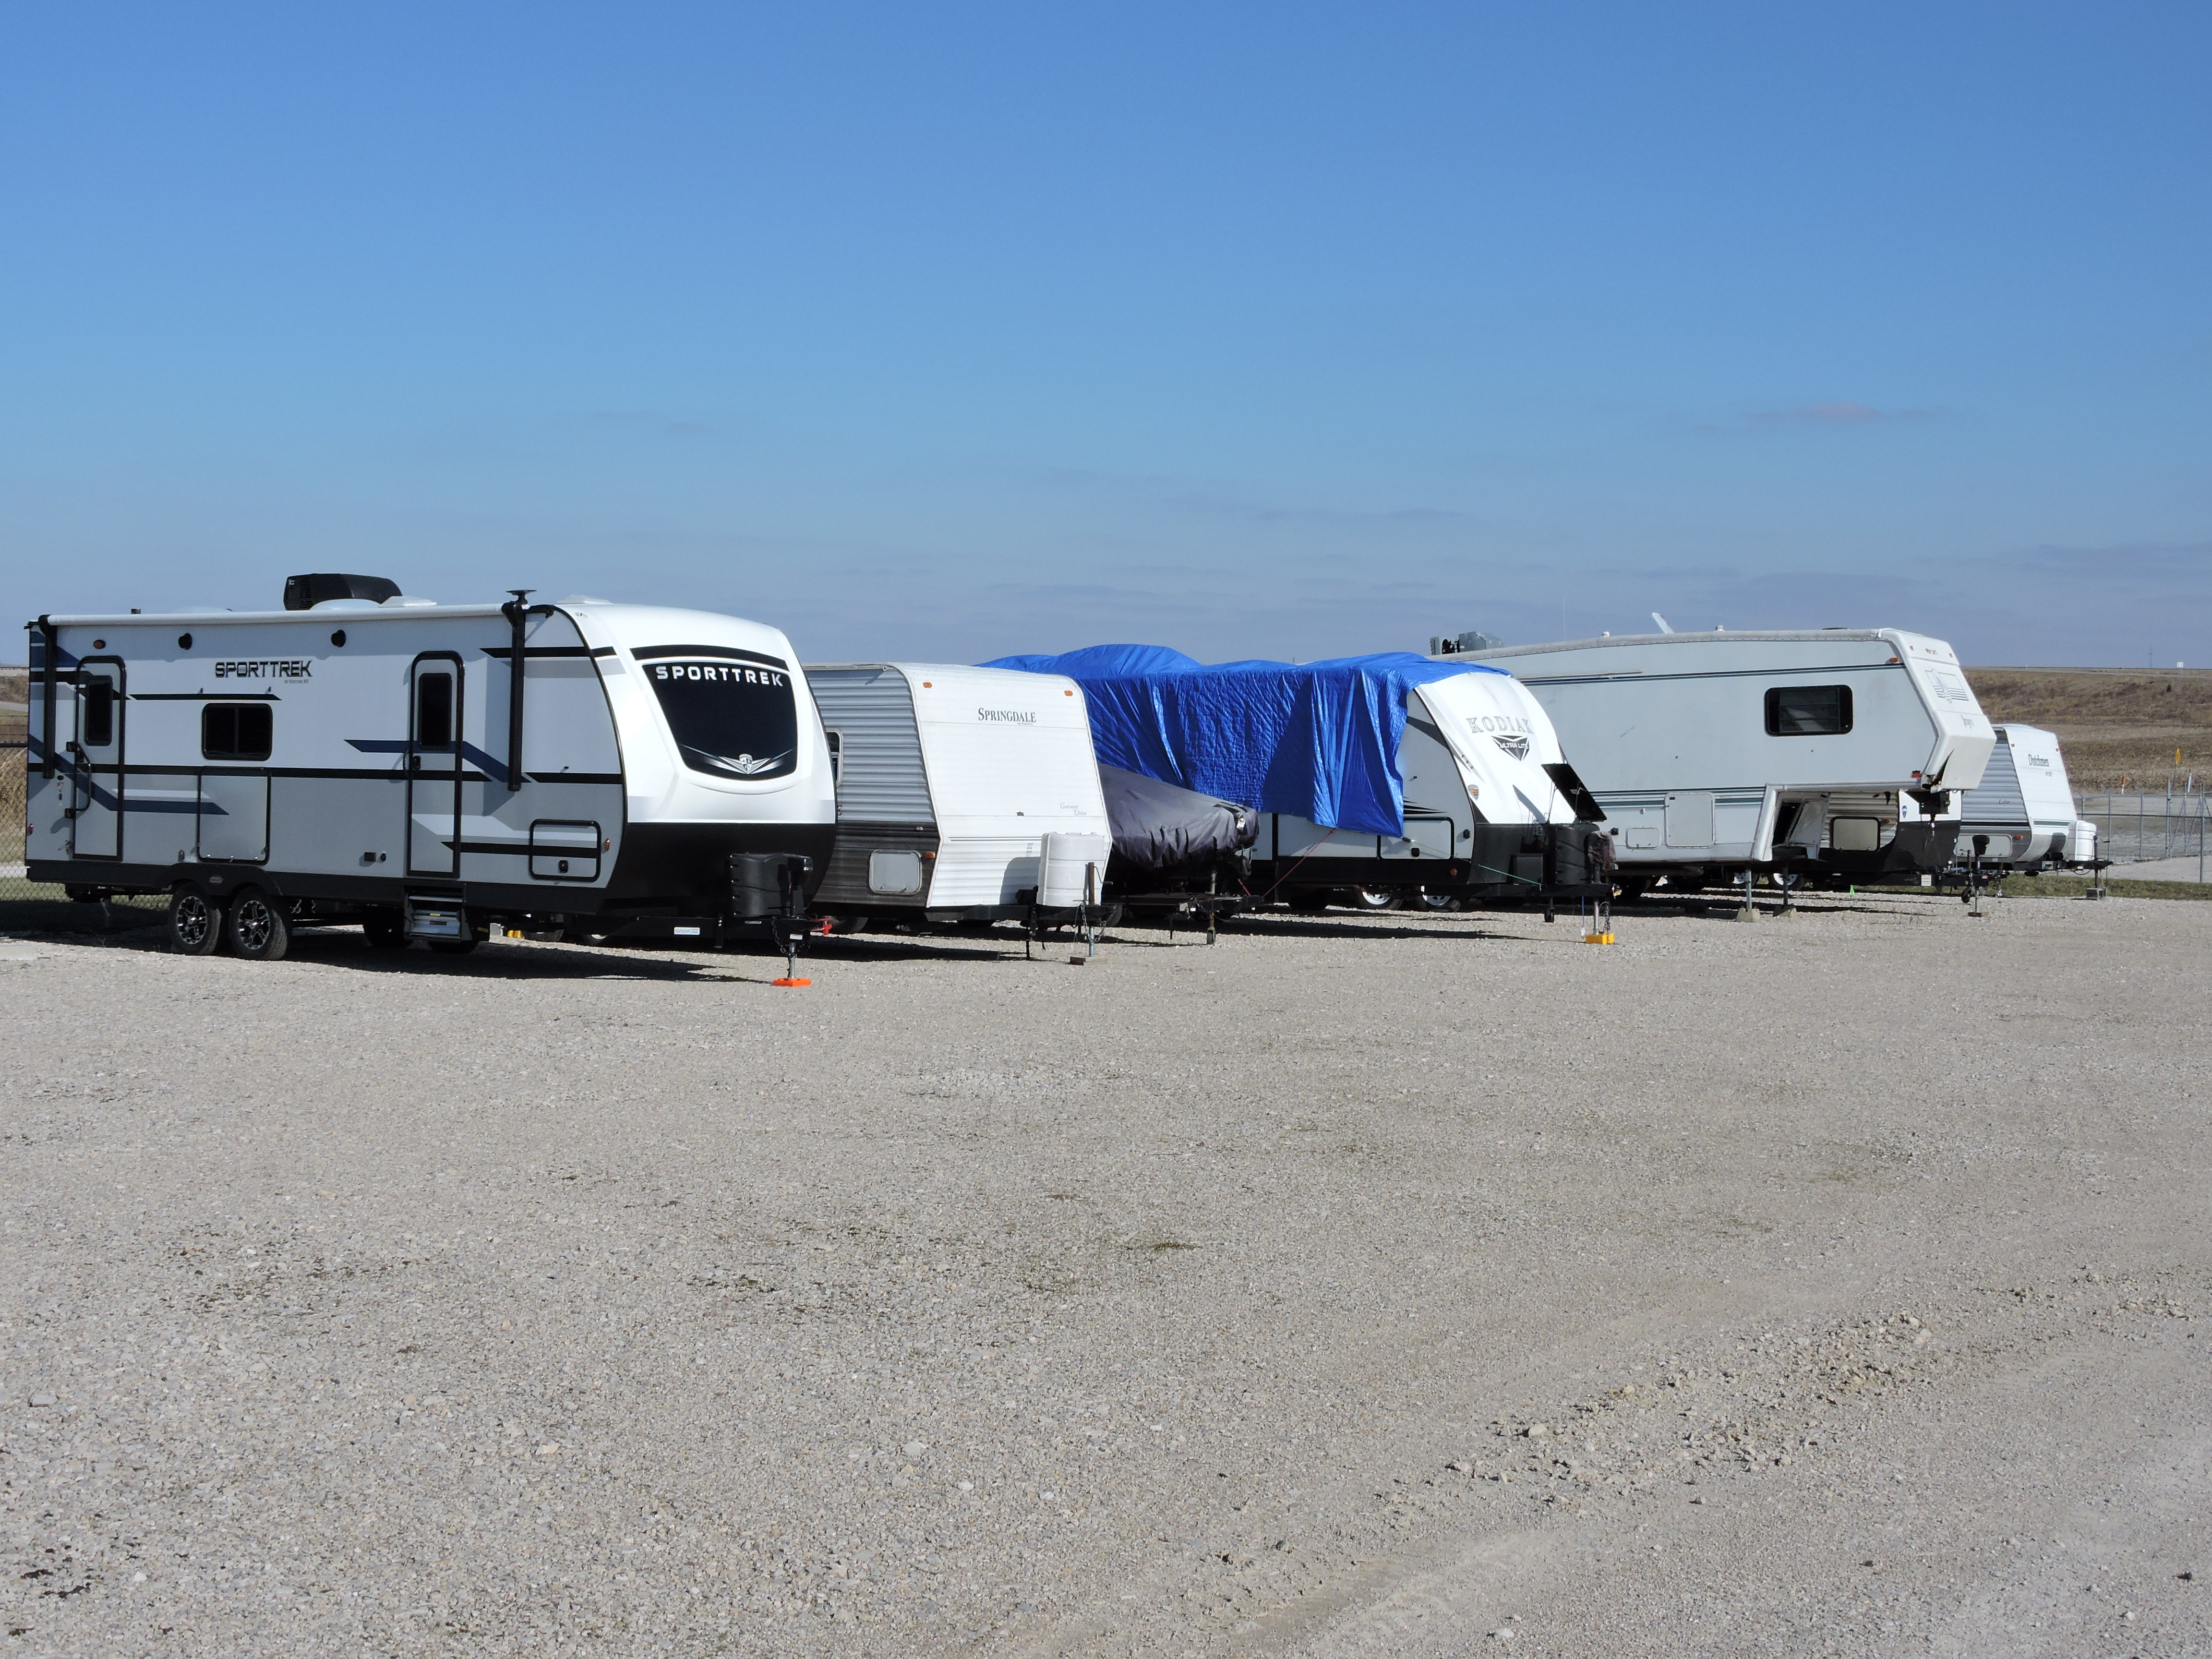 Washington, IN's Access Storage featuring a secure, fenced parking zone dedicated to boats and RVs, ensuring protected storage space.